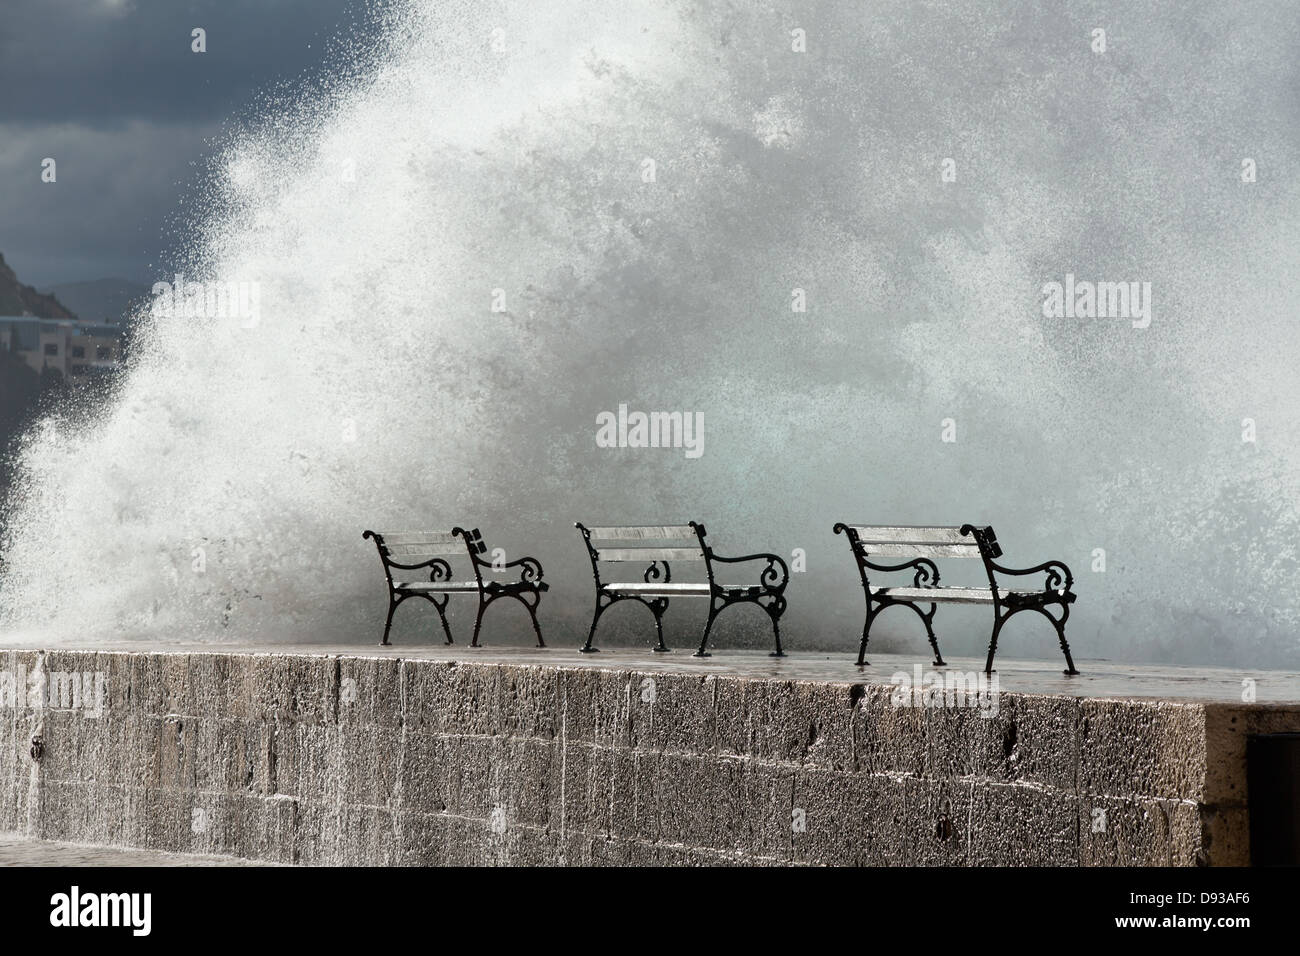 Benches with a wall of spray on a jetty wall Stock Photo